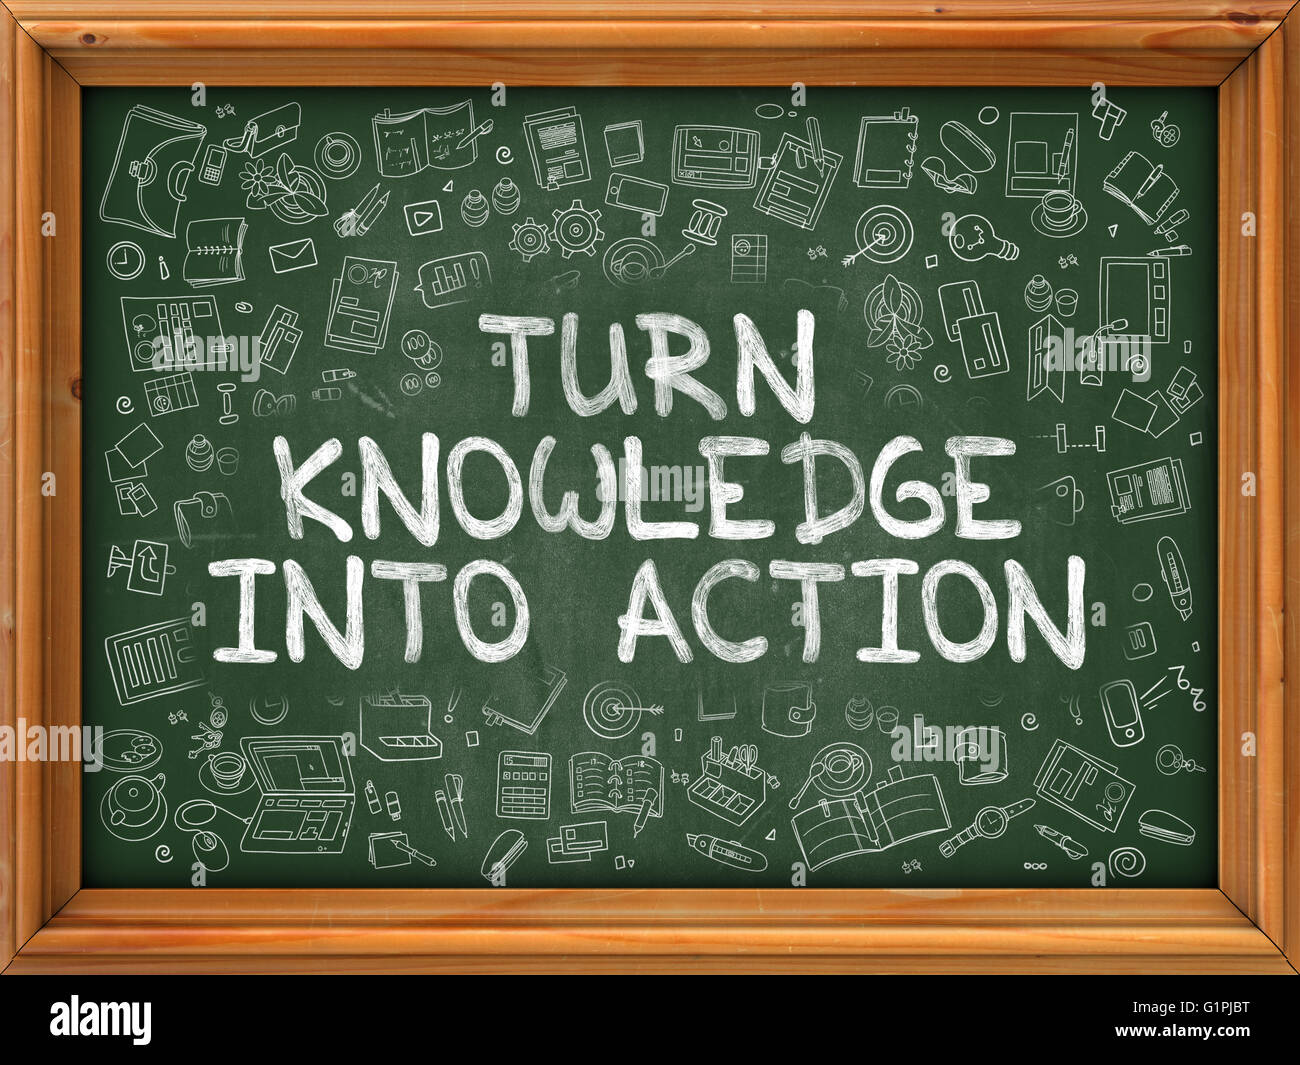 Turn Knowledge into Action - Hand Drawn on Green Chalkboard. Stock Photo